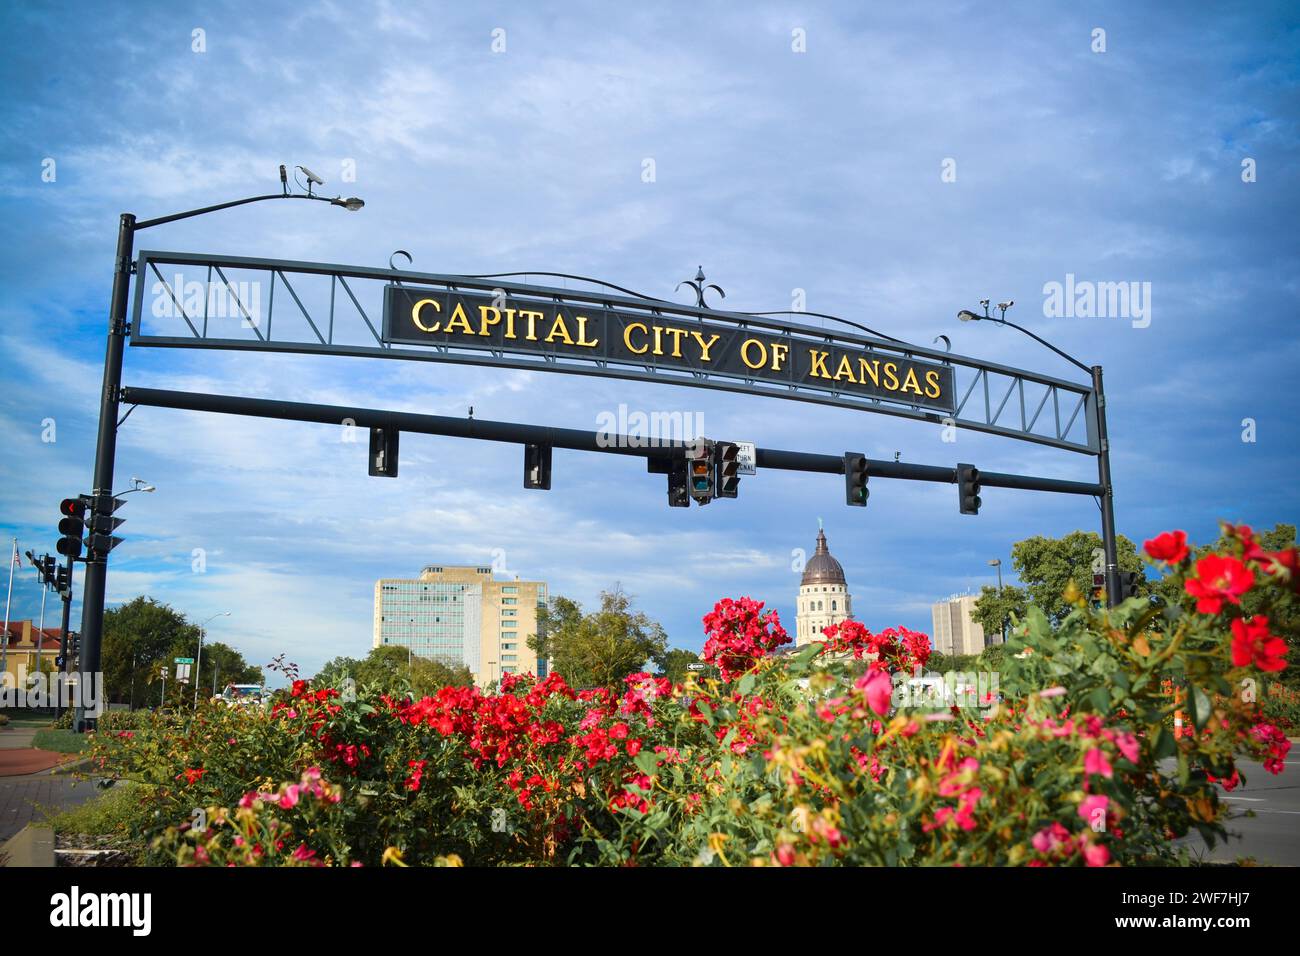 Capital City of the State of Kansas Stock Photo